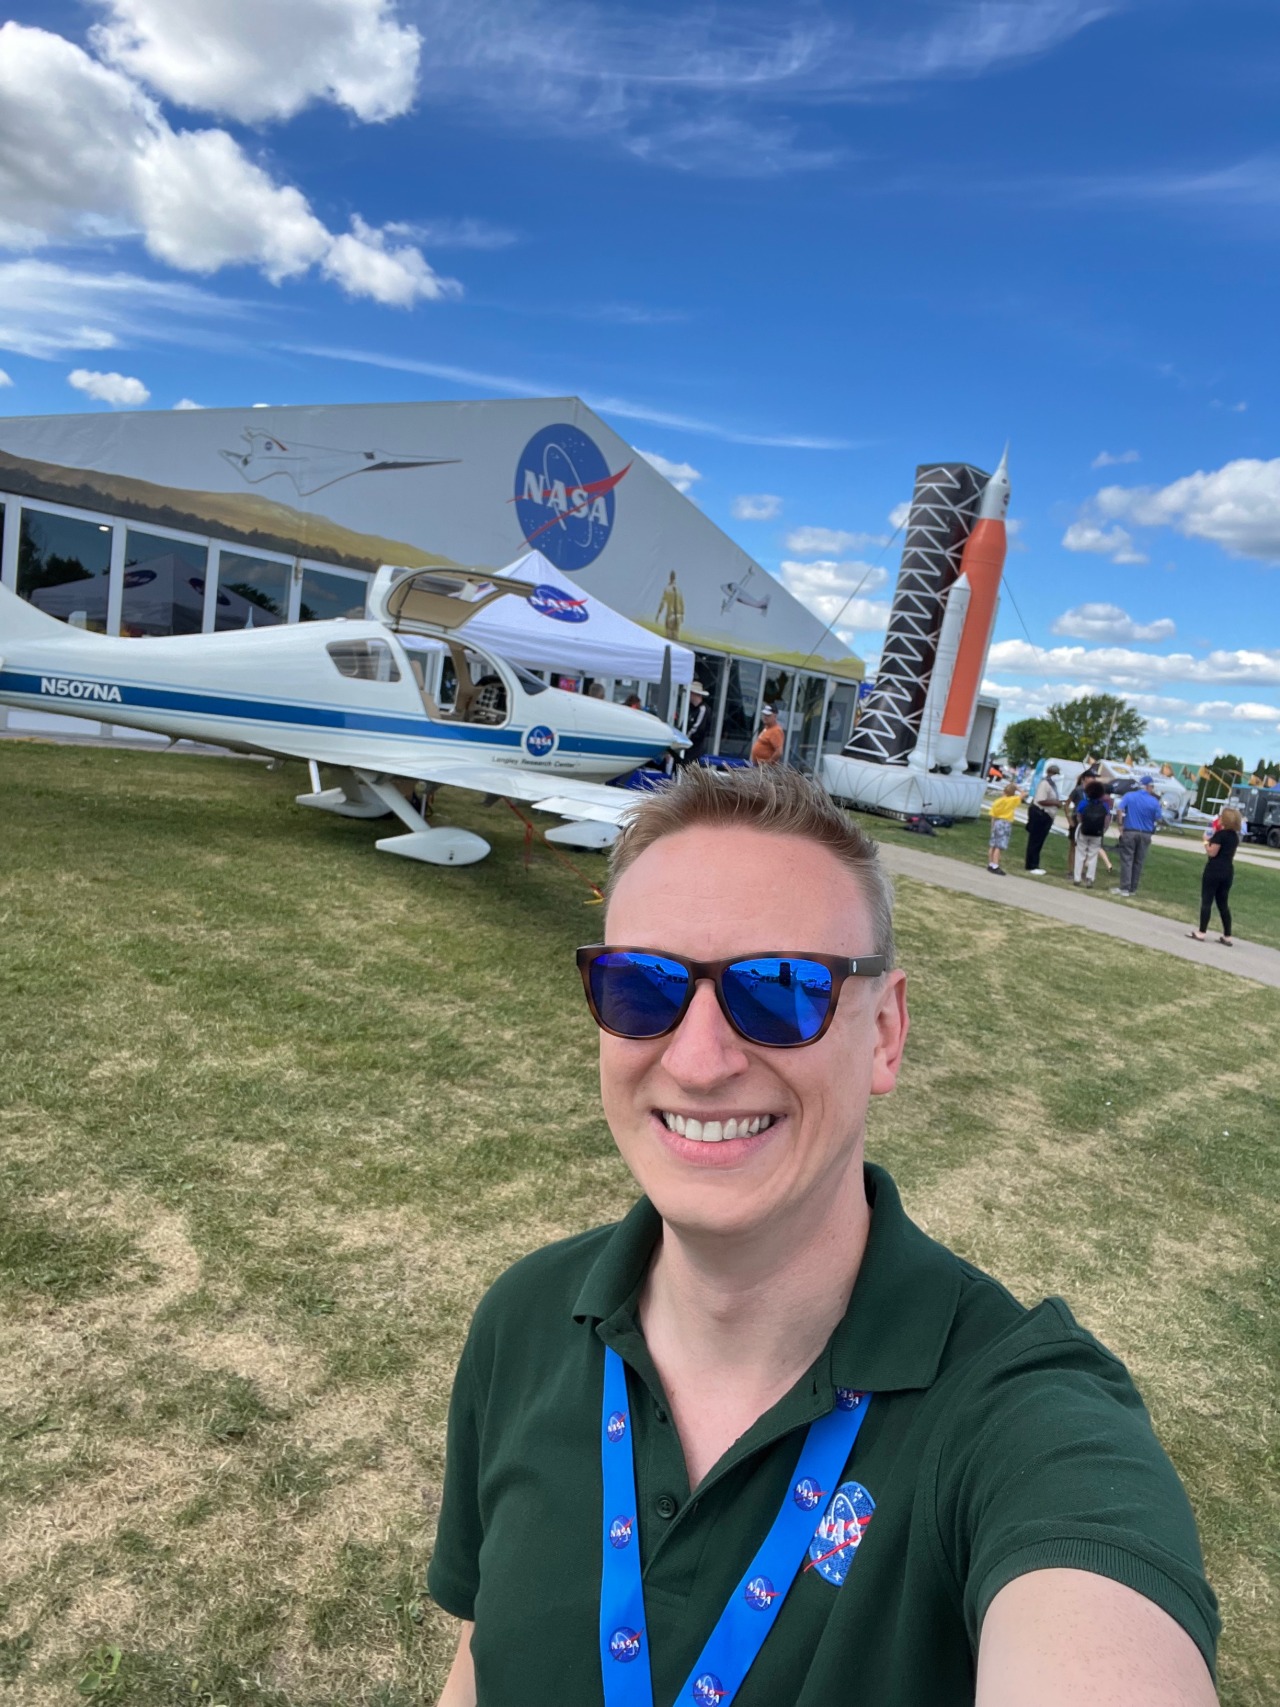 A man in a NASA polo shirt and lanyard takes a selfie in front of a white and blue emblazoned NASA aircraft and a large building with the red white and blue NASA logo imprinted on it.